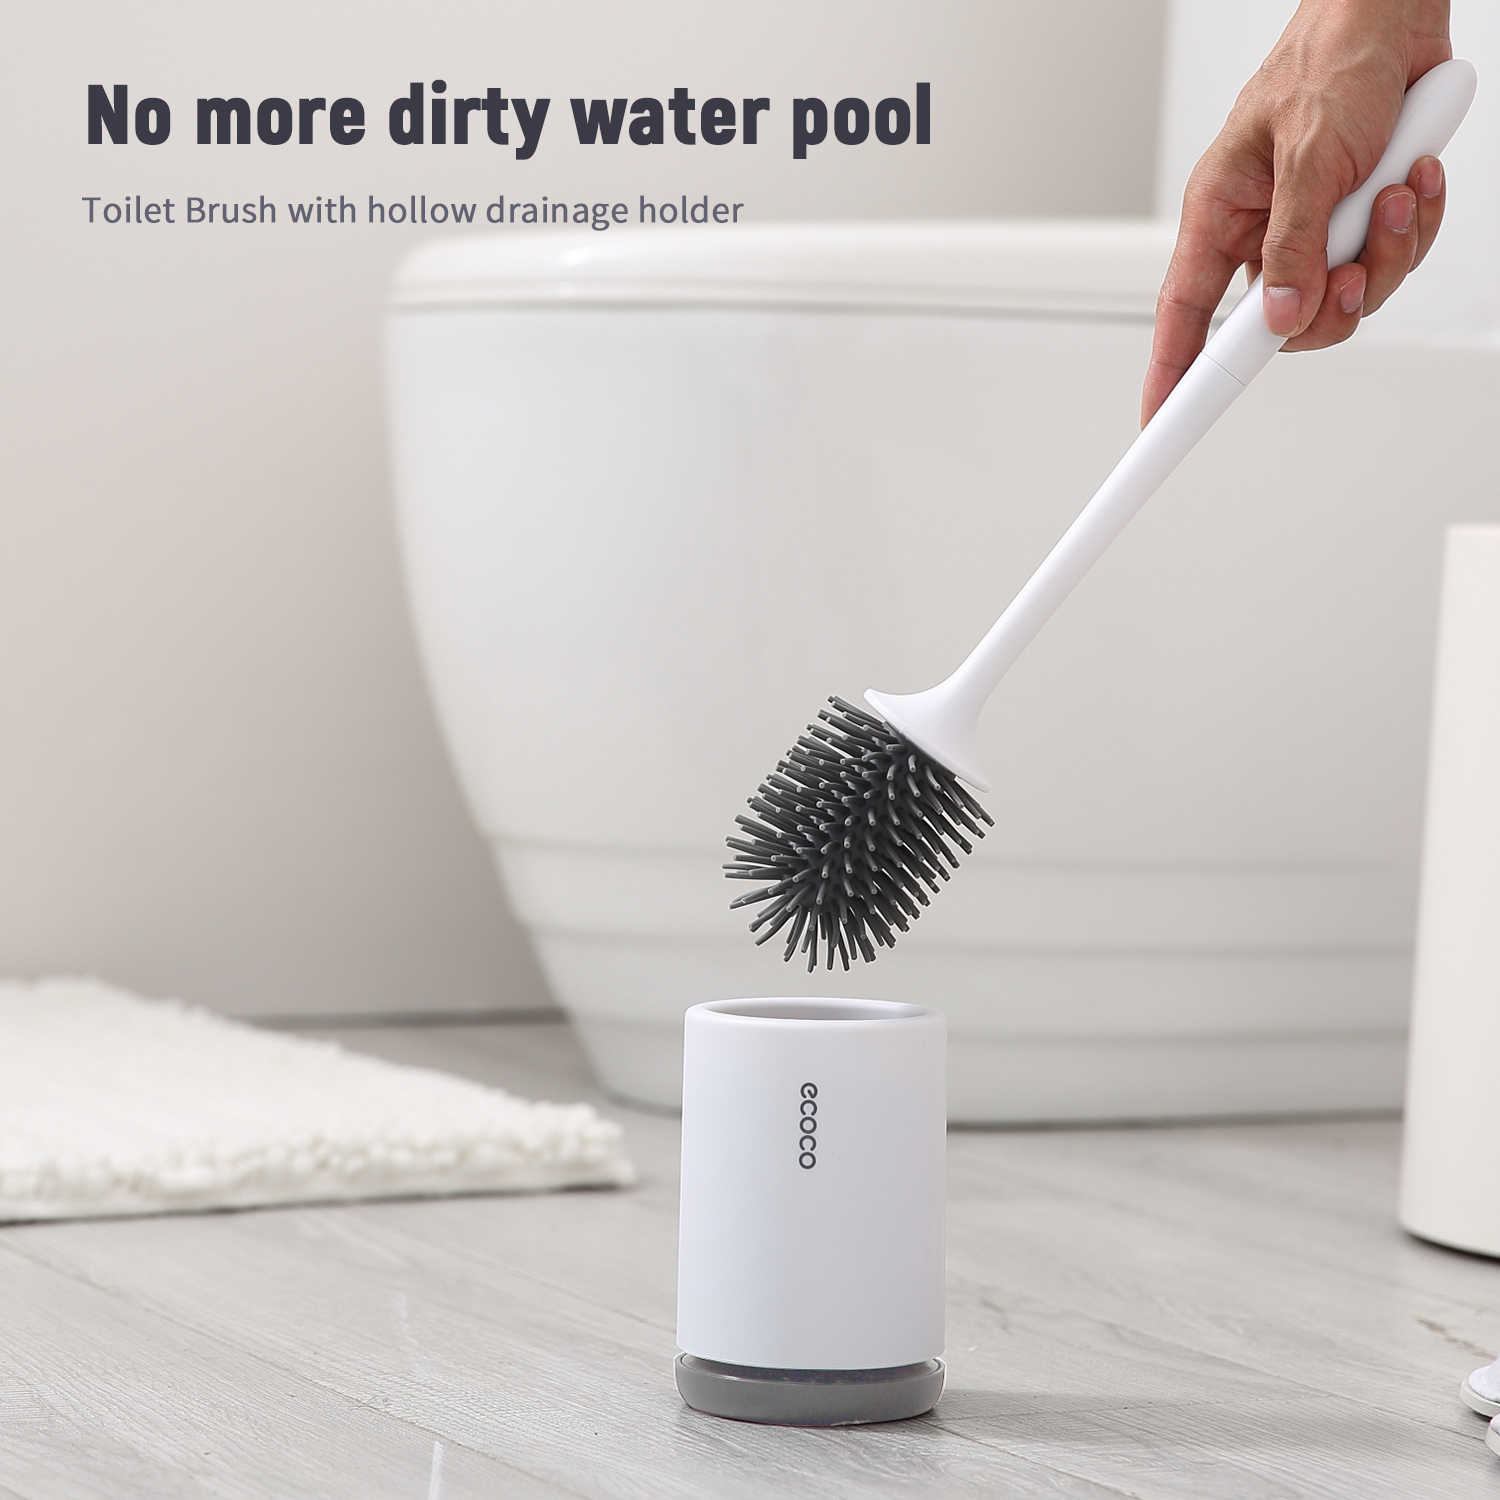 Keep Toilet with Soft TPR Toilet Brush and Holder Set, Quick Drying, Sturdy Grip - image 2 of 7